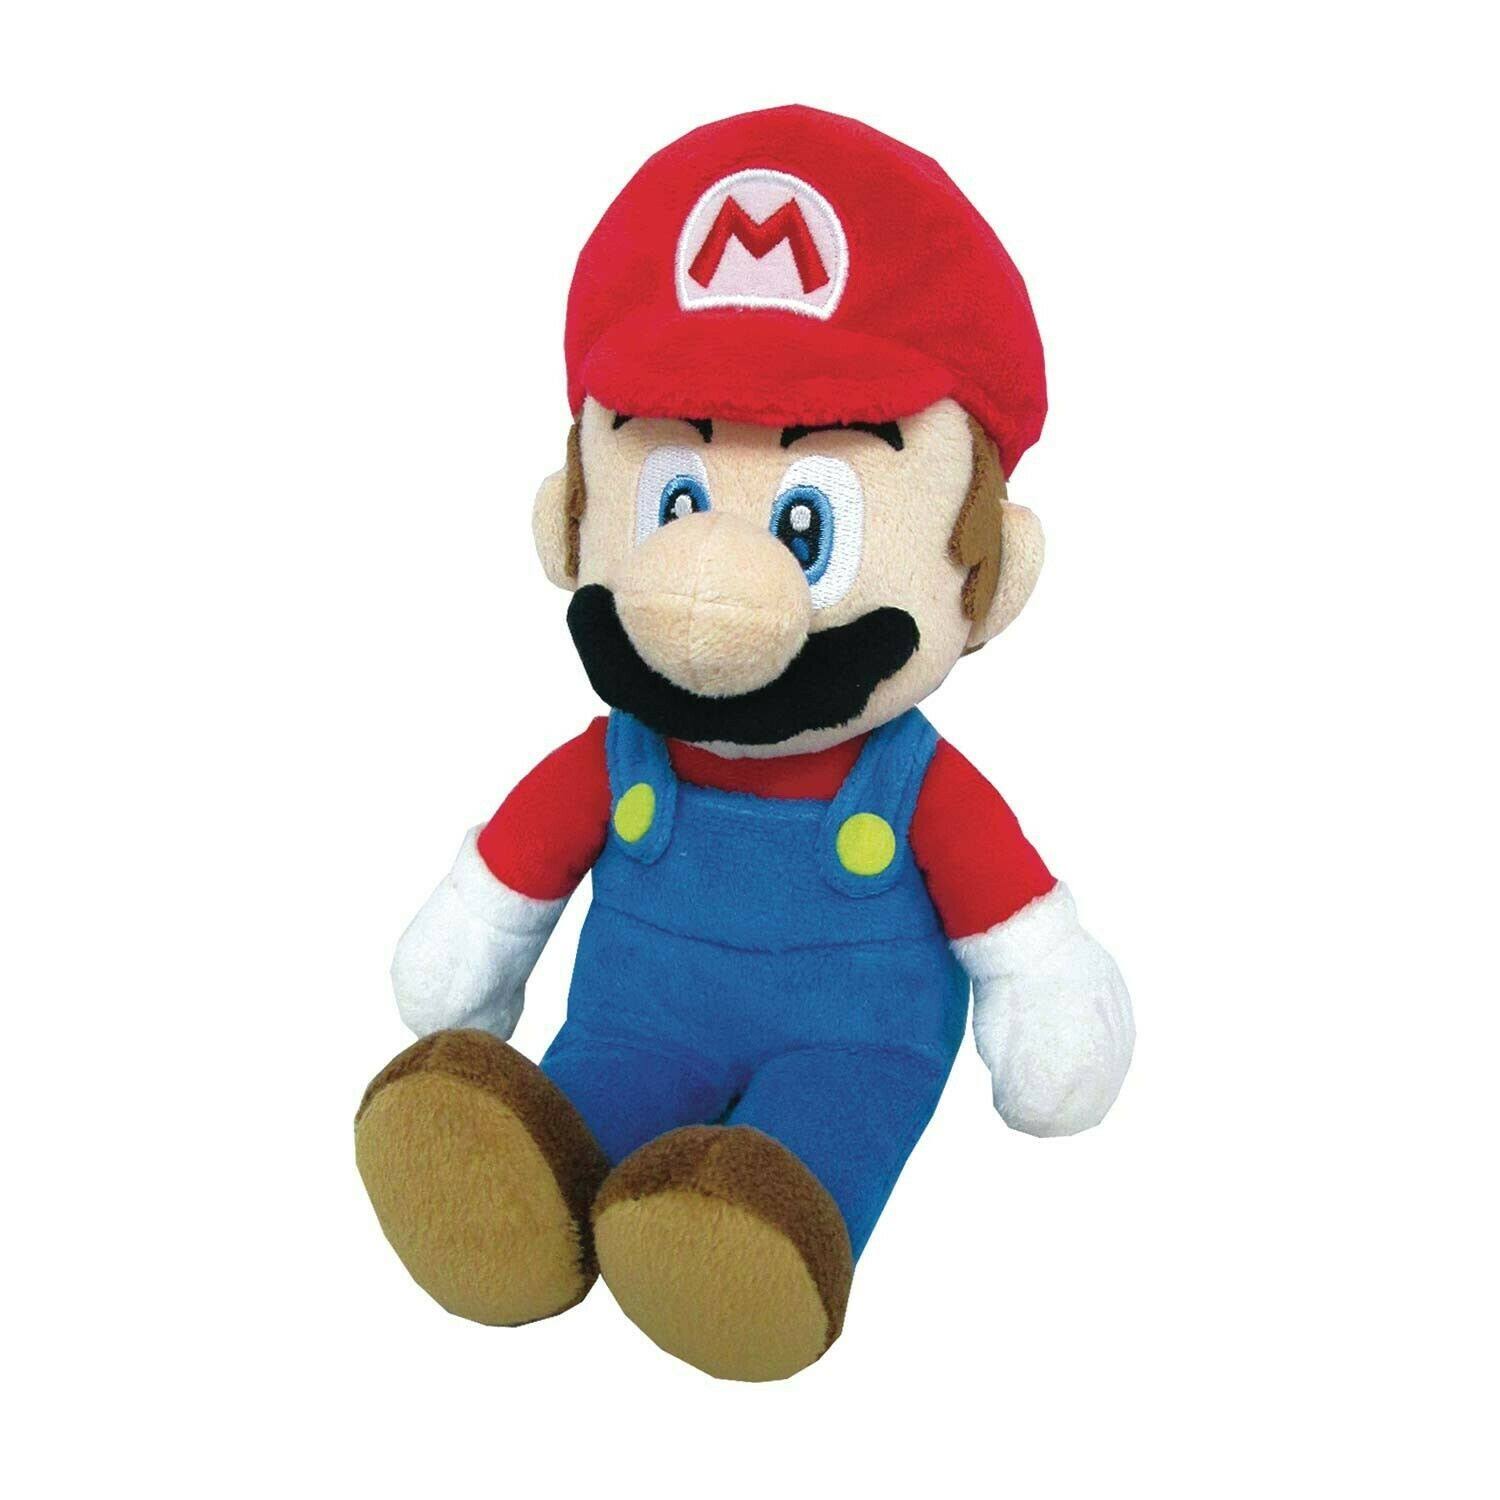 Little Buddy Toys Super Mario All Star Collection Plush Toy - 10"